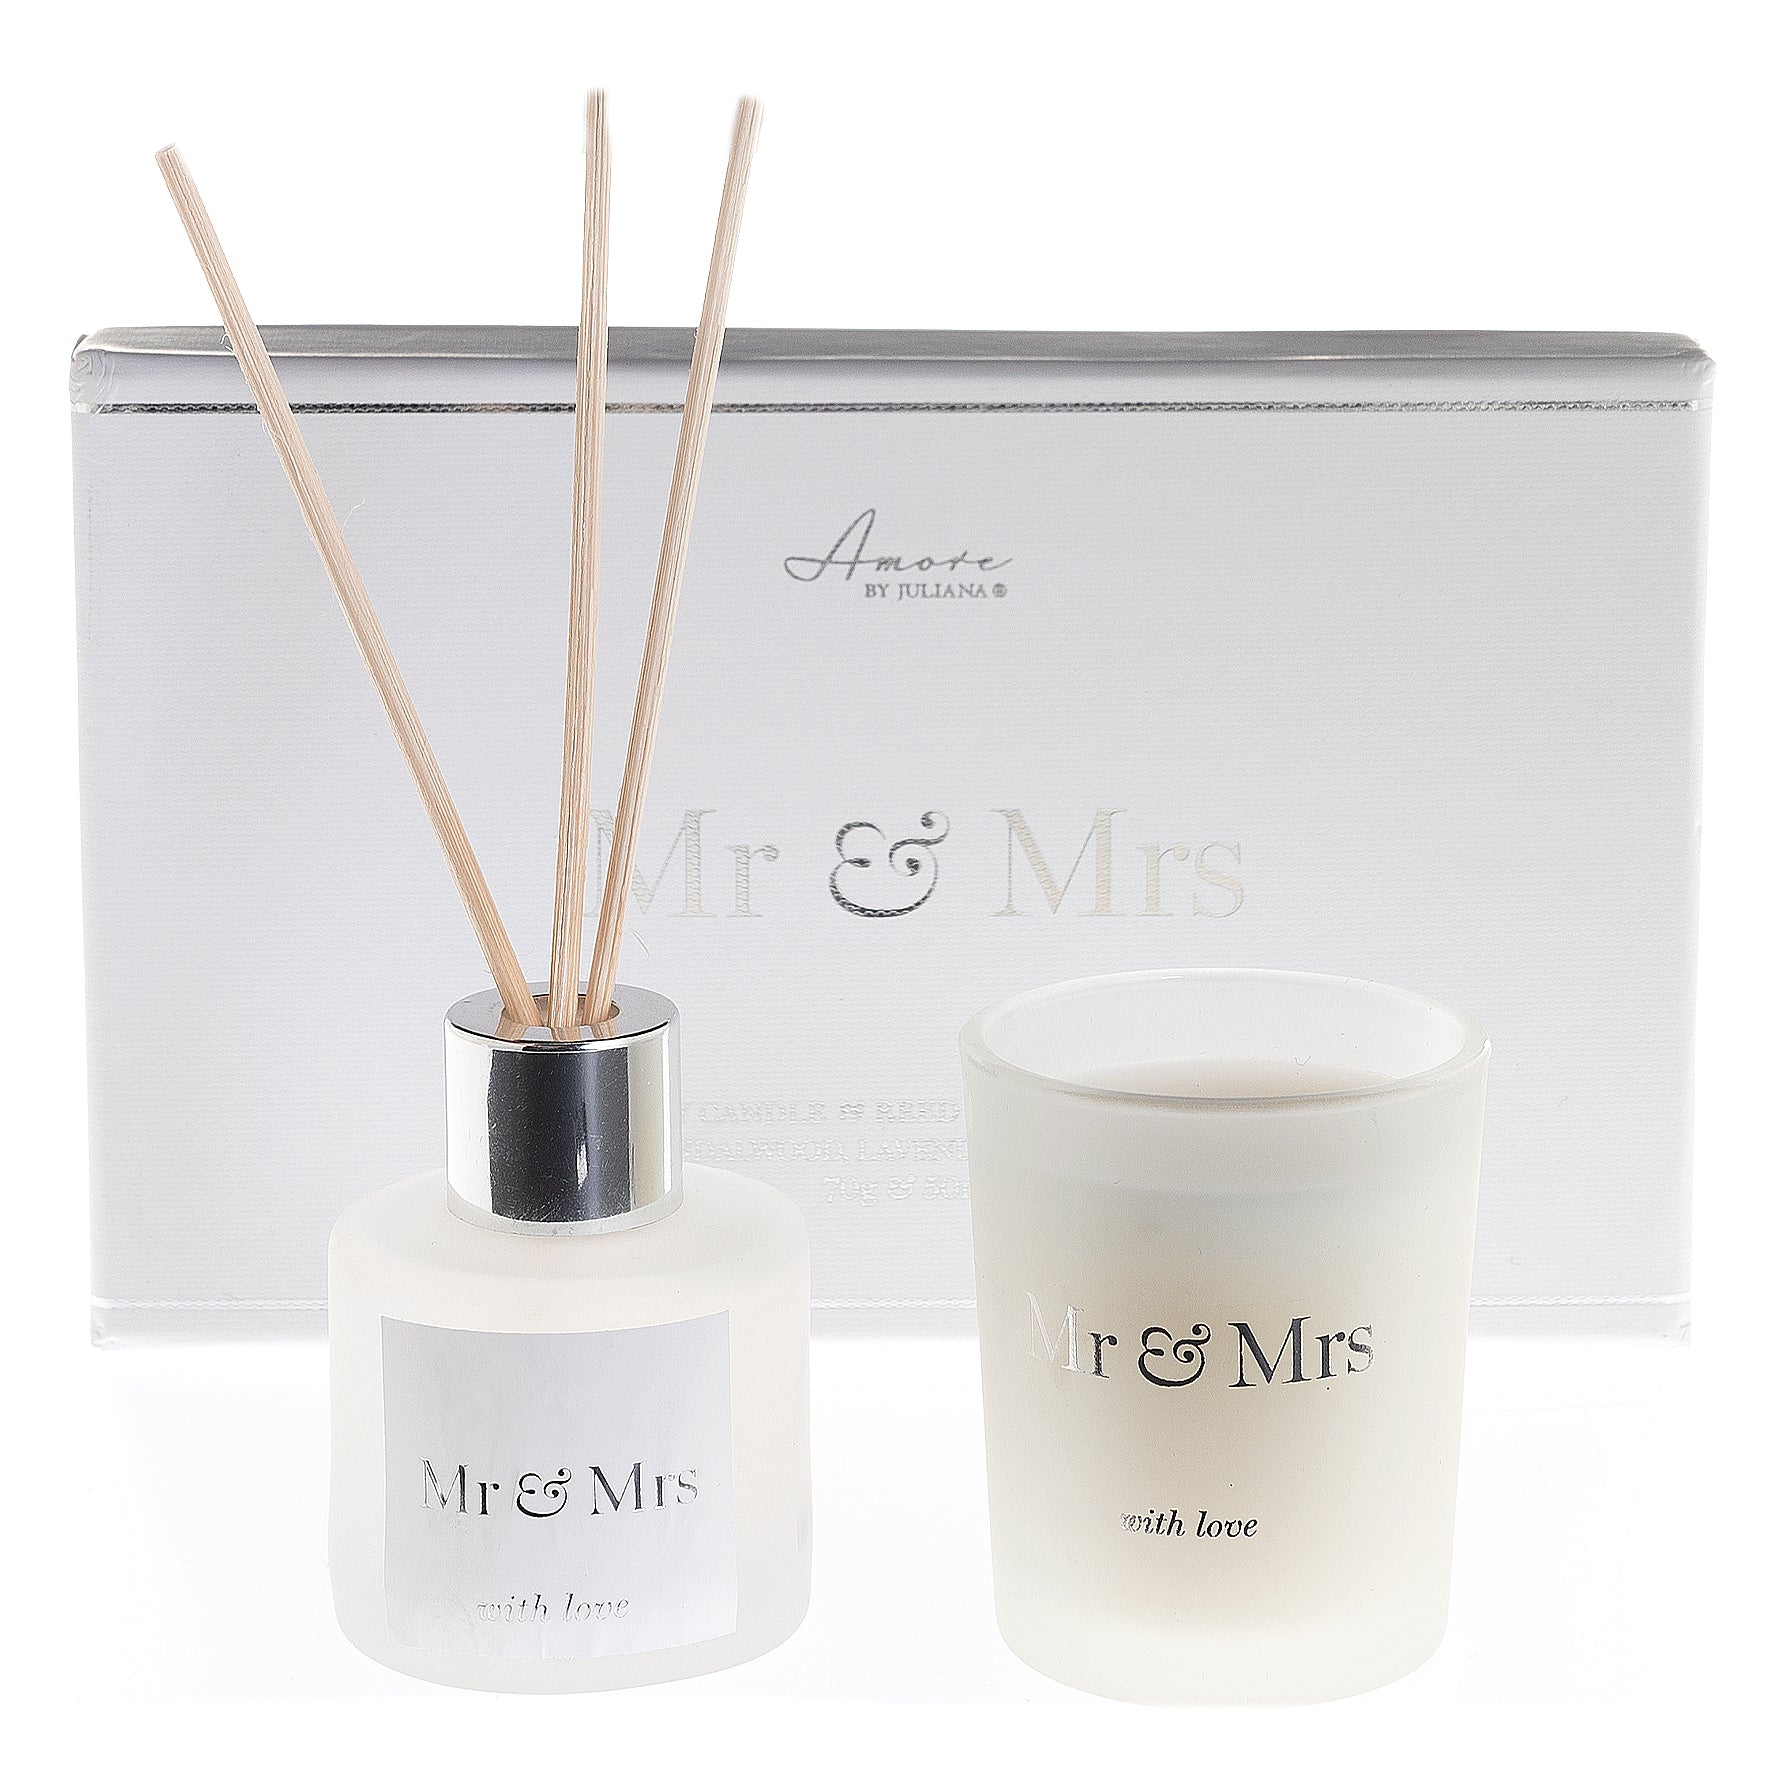 Amore - Mr & Mrs Diffuser and Candle Set